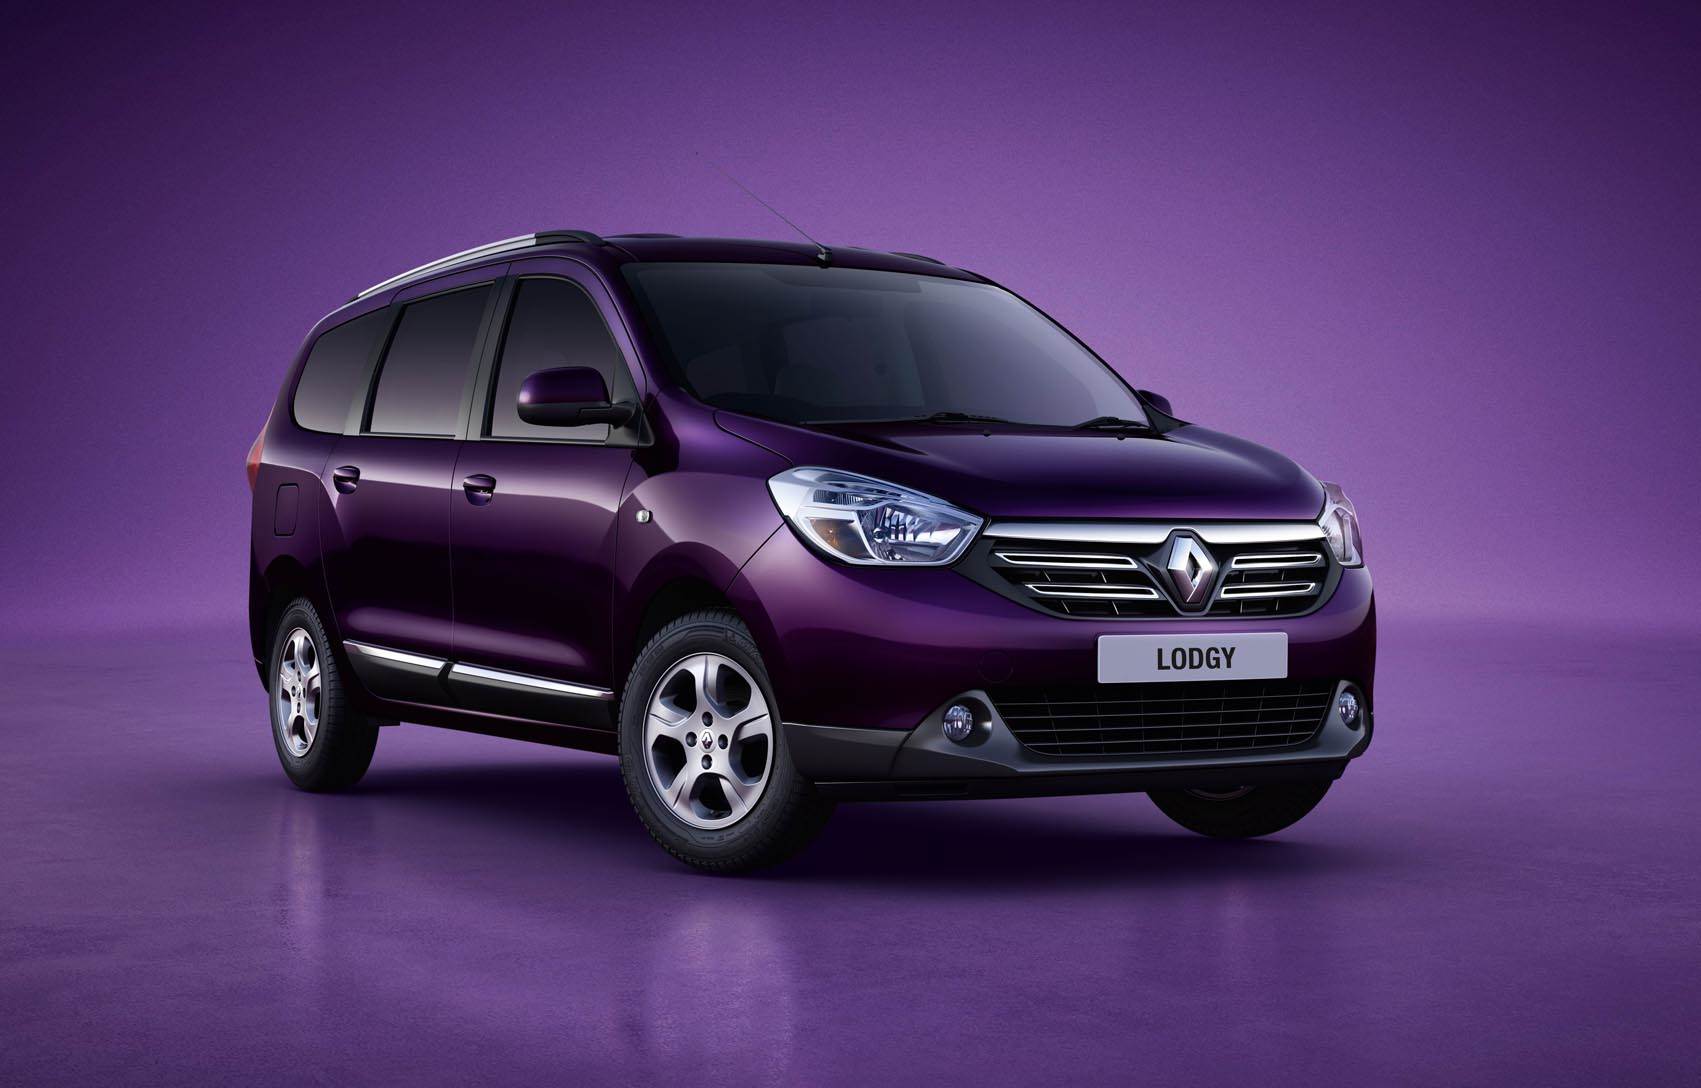 Renault Lodgy coming to India